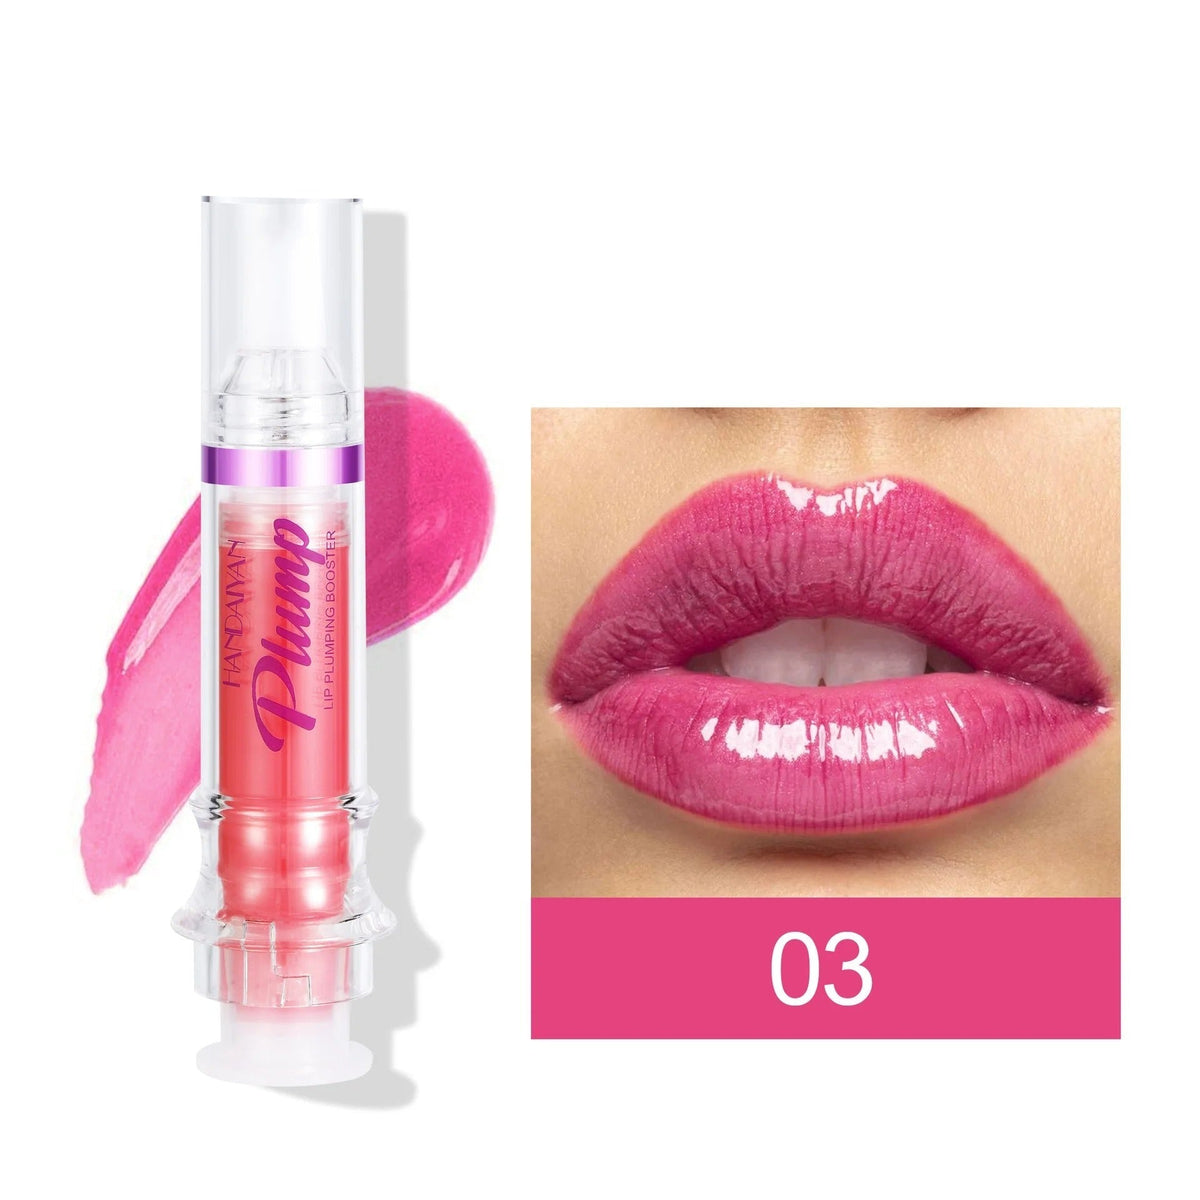 Lips Plumping Booster Serum (70% OFF TODAY)